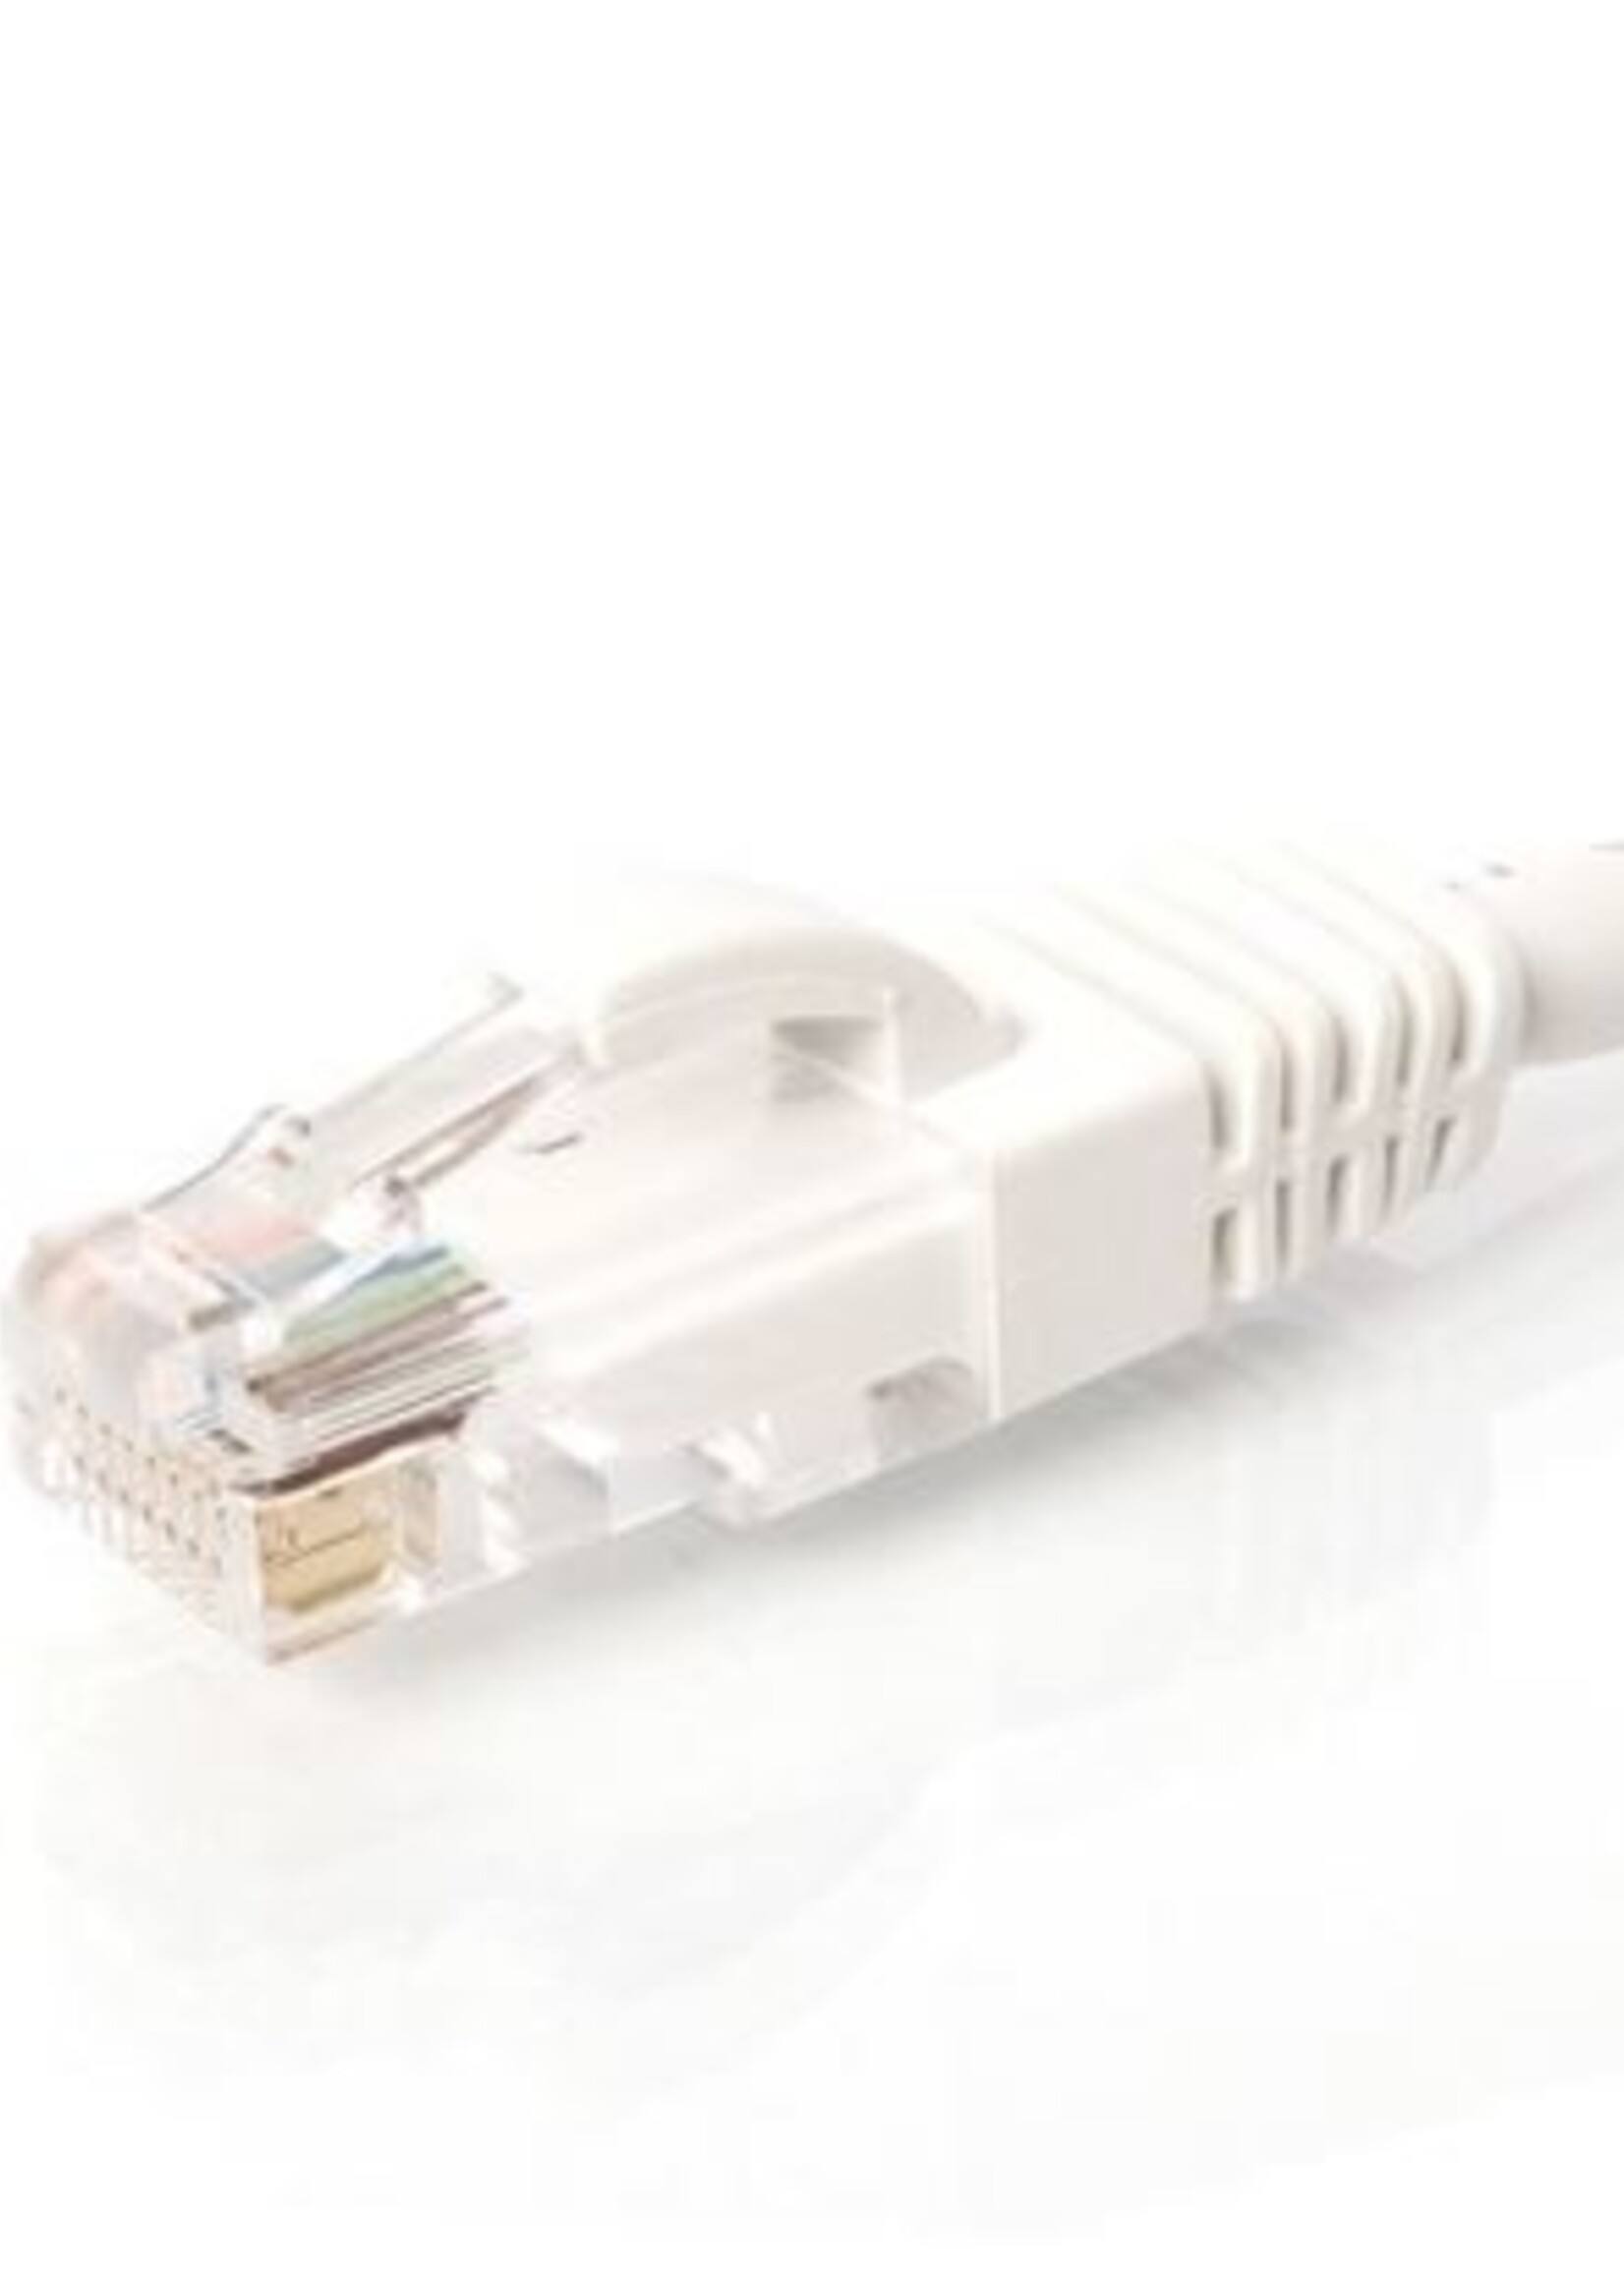 Tera Grand 7 Ft Patch Cable White Cat5e